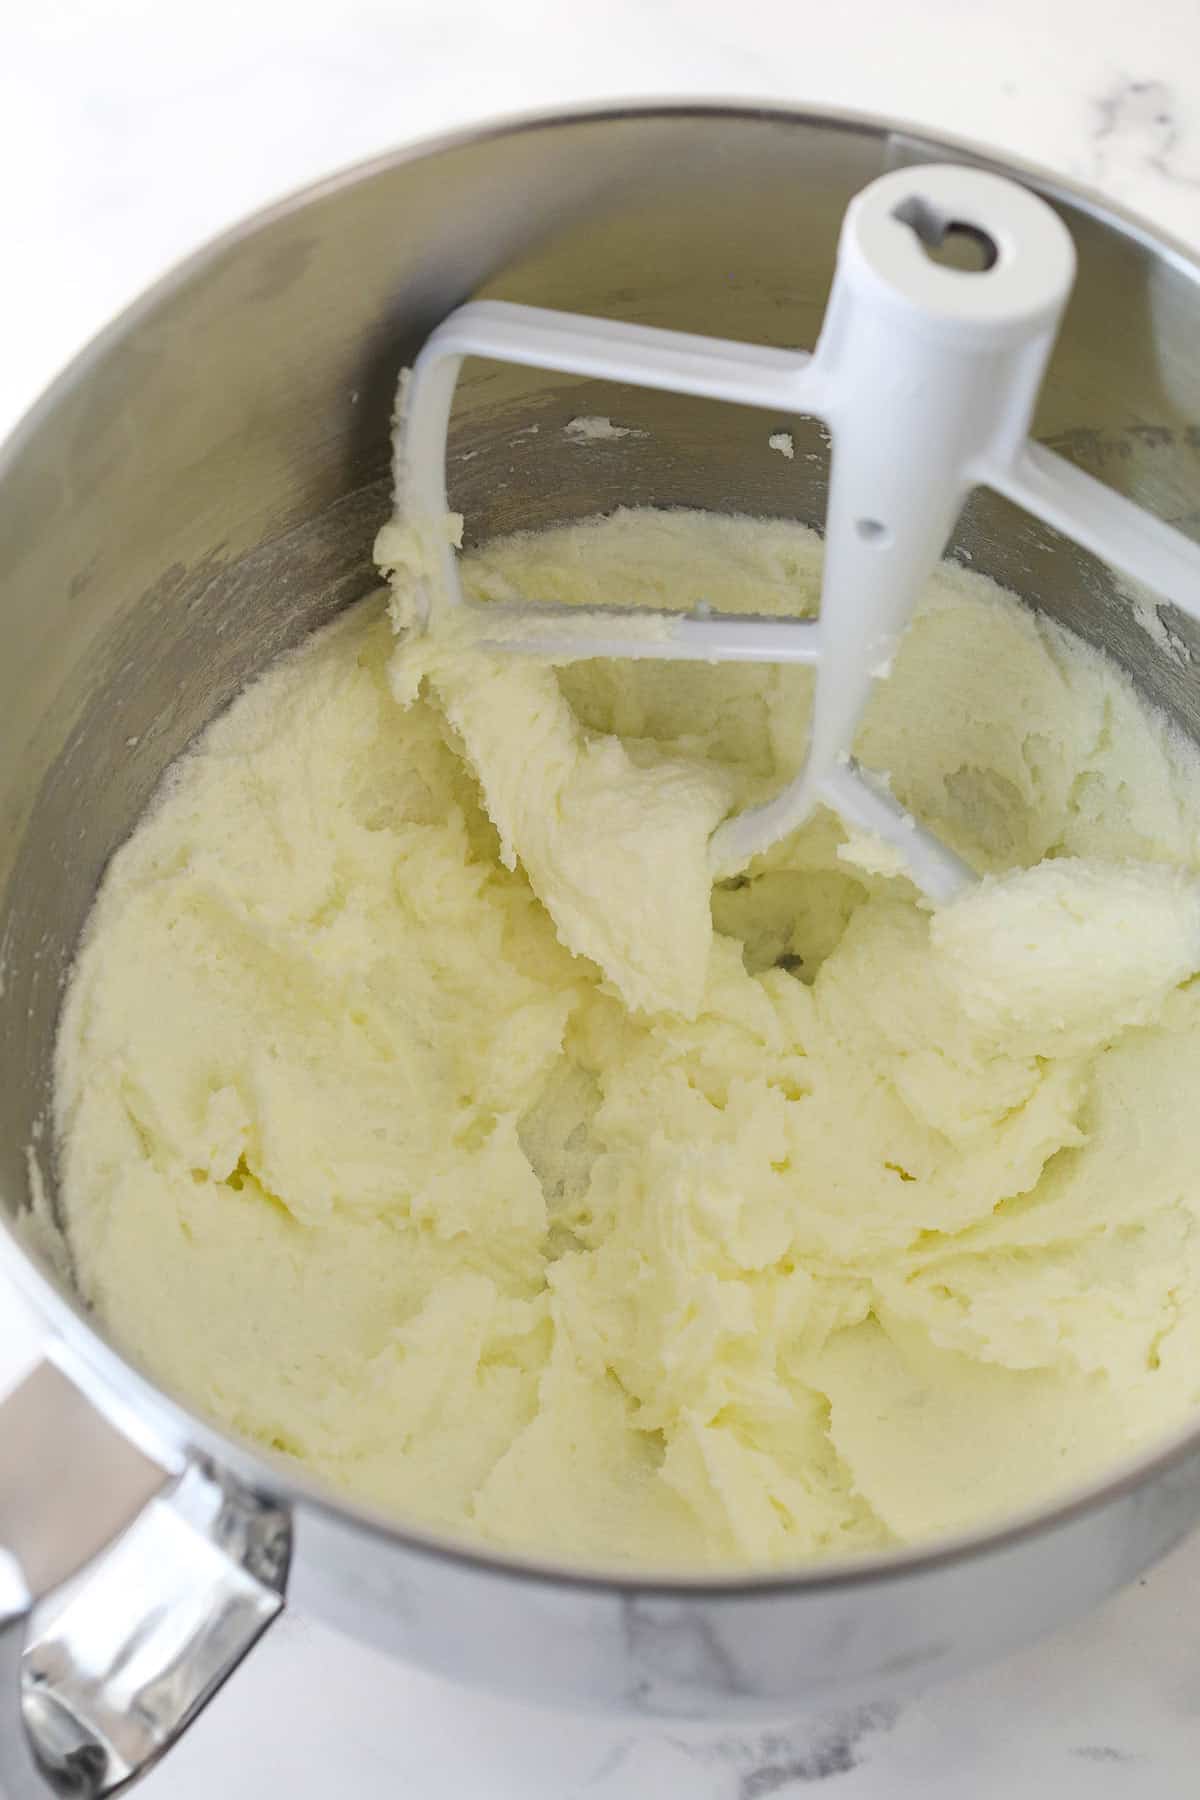 Beating together butter and sugar for cookie dough.